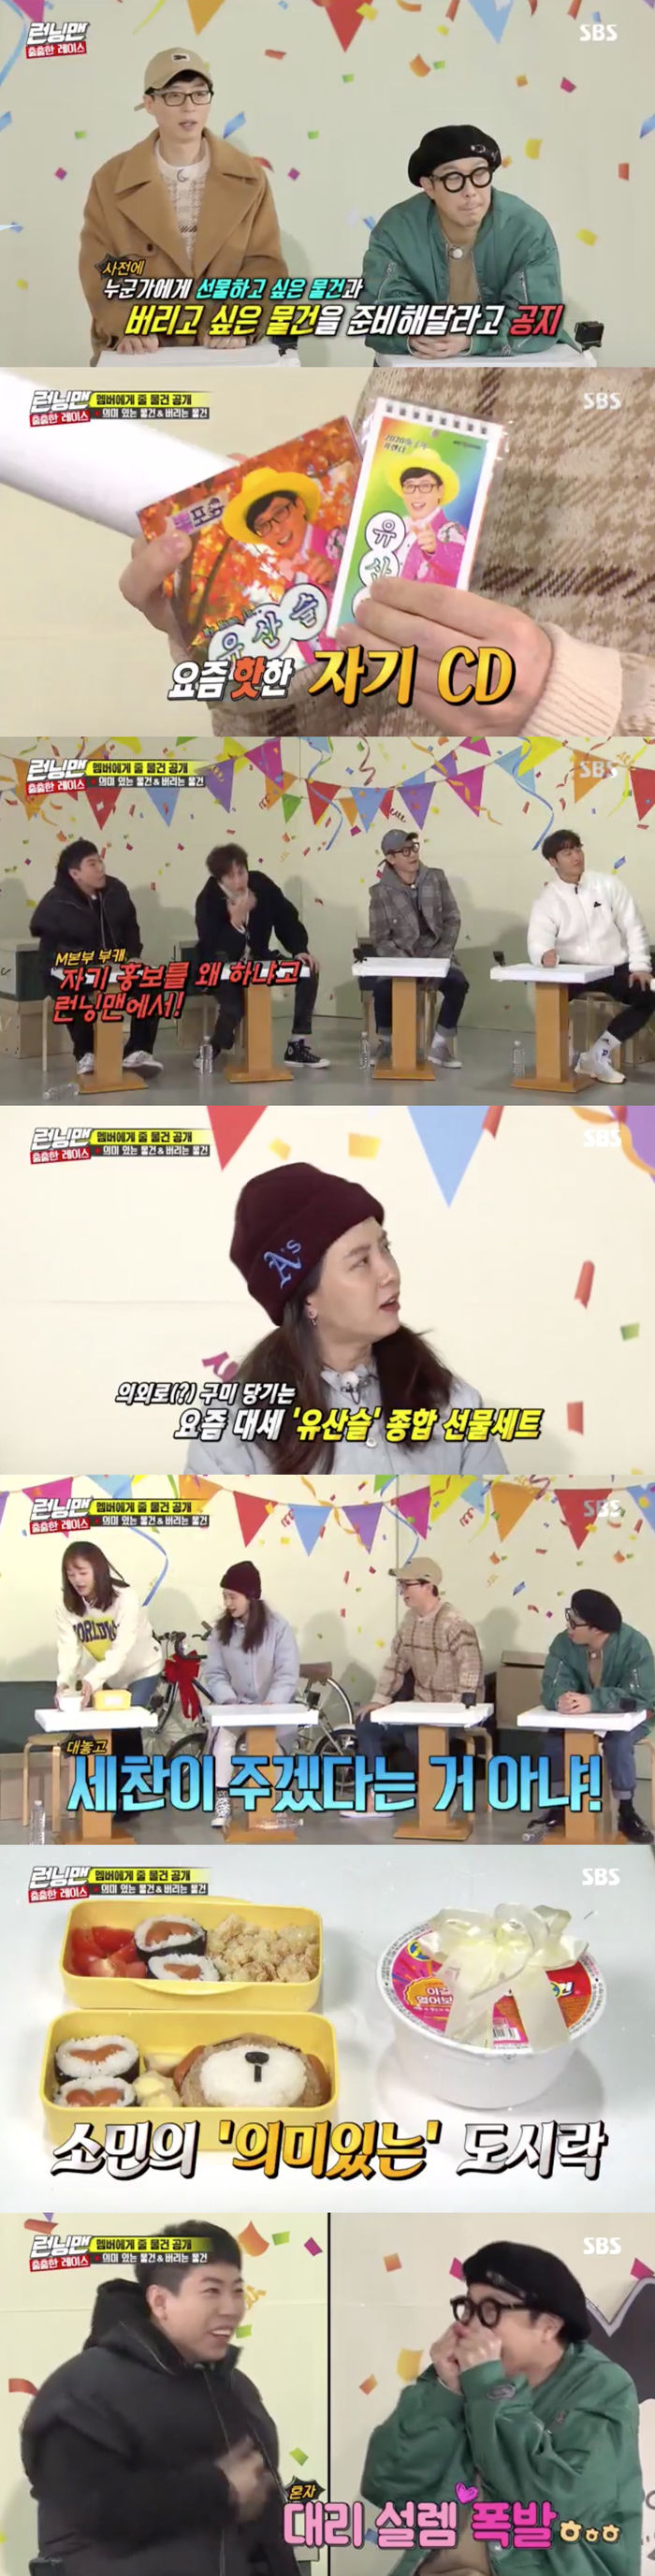 Yoo Jae-Suk has prepared a comprehensive gift set for Heritage Castle.On SBS Running Man broadcasted on the 9th, Running Man was prepared to give the members before the full-scale race.On the day of the broadcast, the production team asked Running Man to bring something he wanted to present to someone in advance and something he could not throw away himself, but someone wanted him to throw away.Running Man released the items he had prepared: For you, I prepared them for what you would like.I prepared you for easy carry and not burdensome. Yoo Jae-Suk said, You guys like it so much. Its hot these days.I prepared a comprehensive gift set for Heritage Castle, he said, revealing Heritage Castles CD, posters and goodes.The items prepared by Jeon So-min also caught the eye. Jeon So-min pulled out a cheap lunch box himself, saying, I did not sleep well because I was preparing meaningful gifts.Yoo Jae-Suk said, Is not this a gift from a chan?Lee Kwang-soo then said, I took a picture of Sechan in the morning and sent it to him. Yang Se-chan explained, I contacted him about this.Jeon So-min said, I just asked you how this is. And Haha, who saw it, laughed because he could not stand the selem in the appearance of the two people, saying, Im shaking.